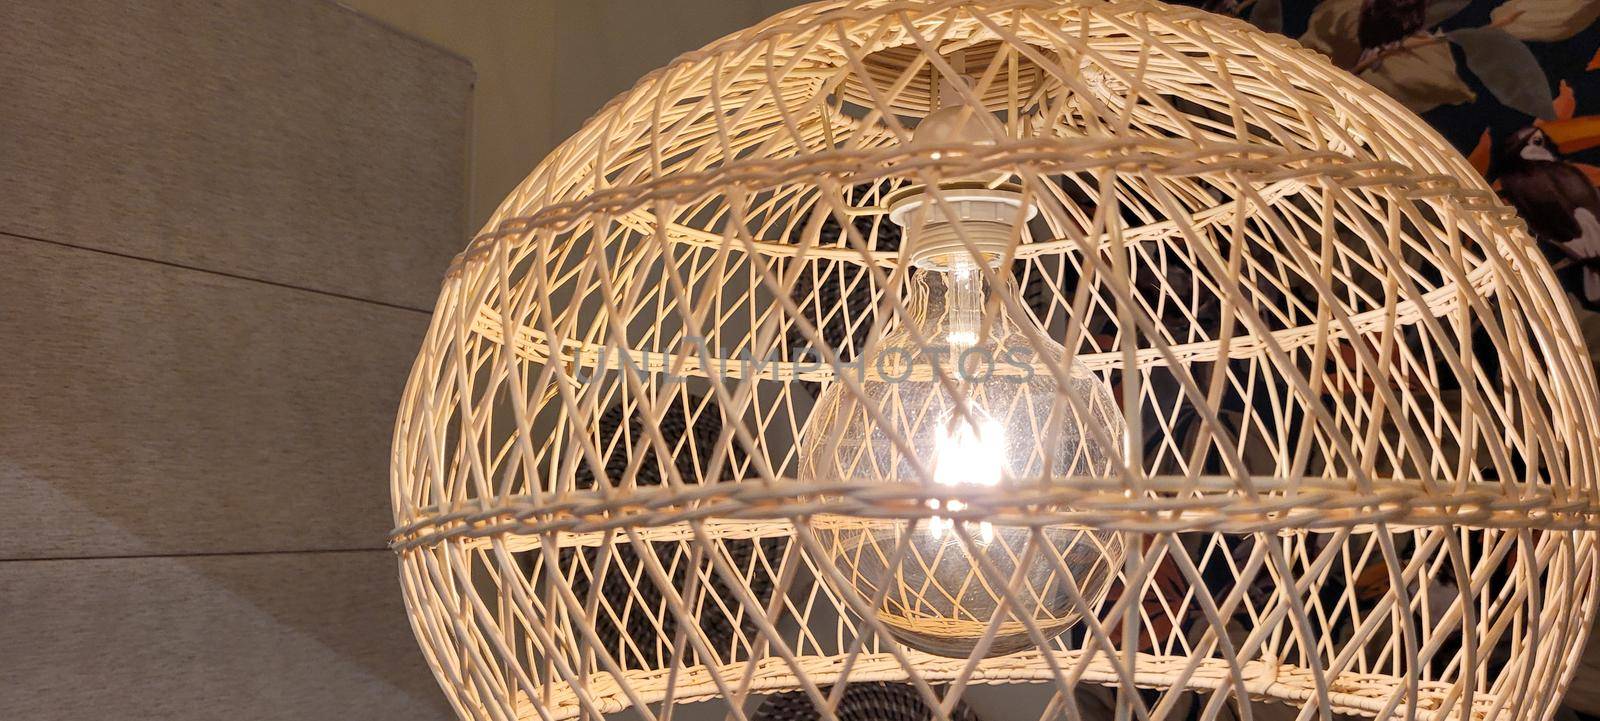 straw chandelier filament lamp lighting with straw screen finish by sarsa